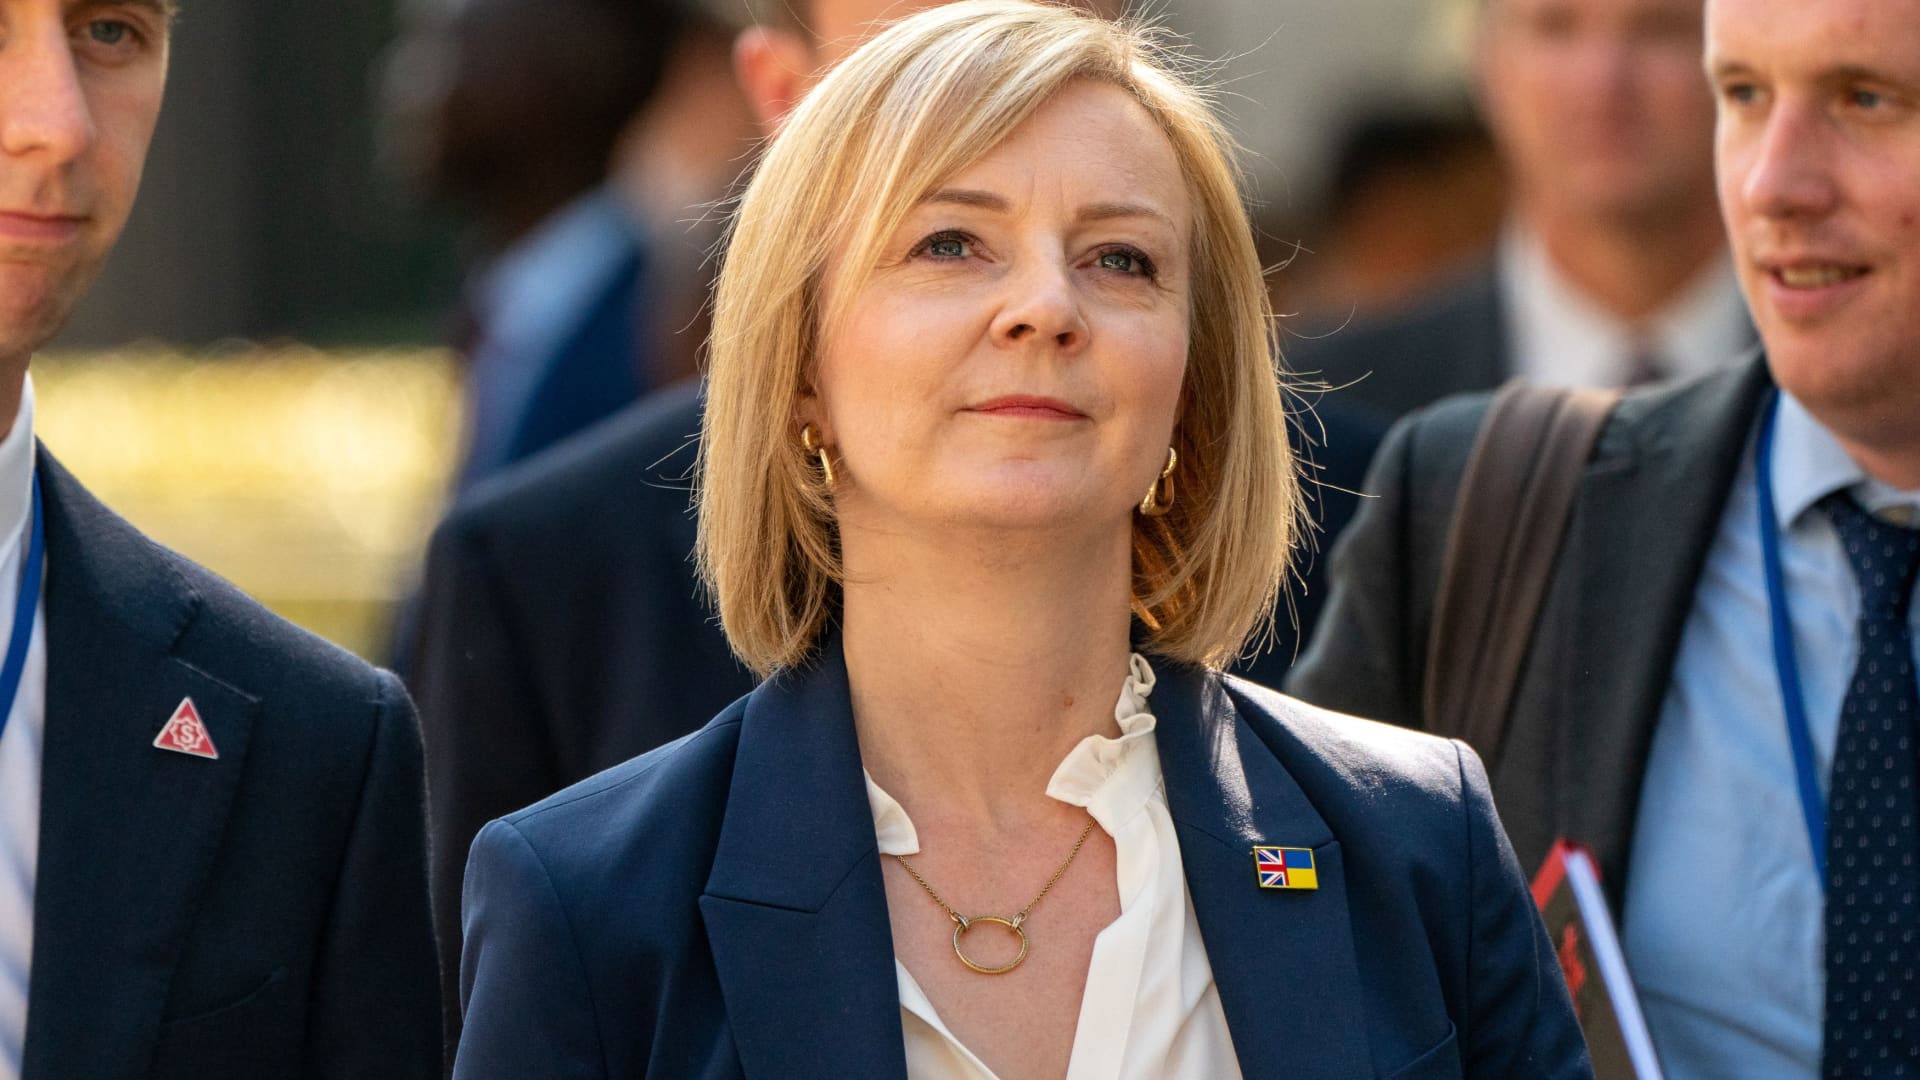 British Prime Minister Liz Truss, who took office in September, has announced a sweeping program of economic reforms.